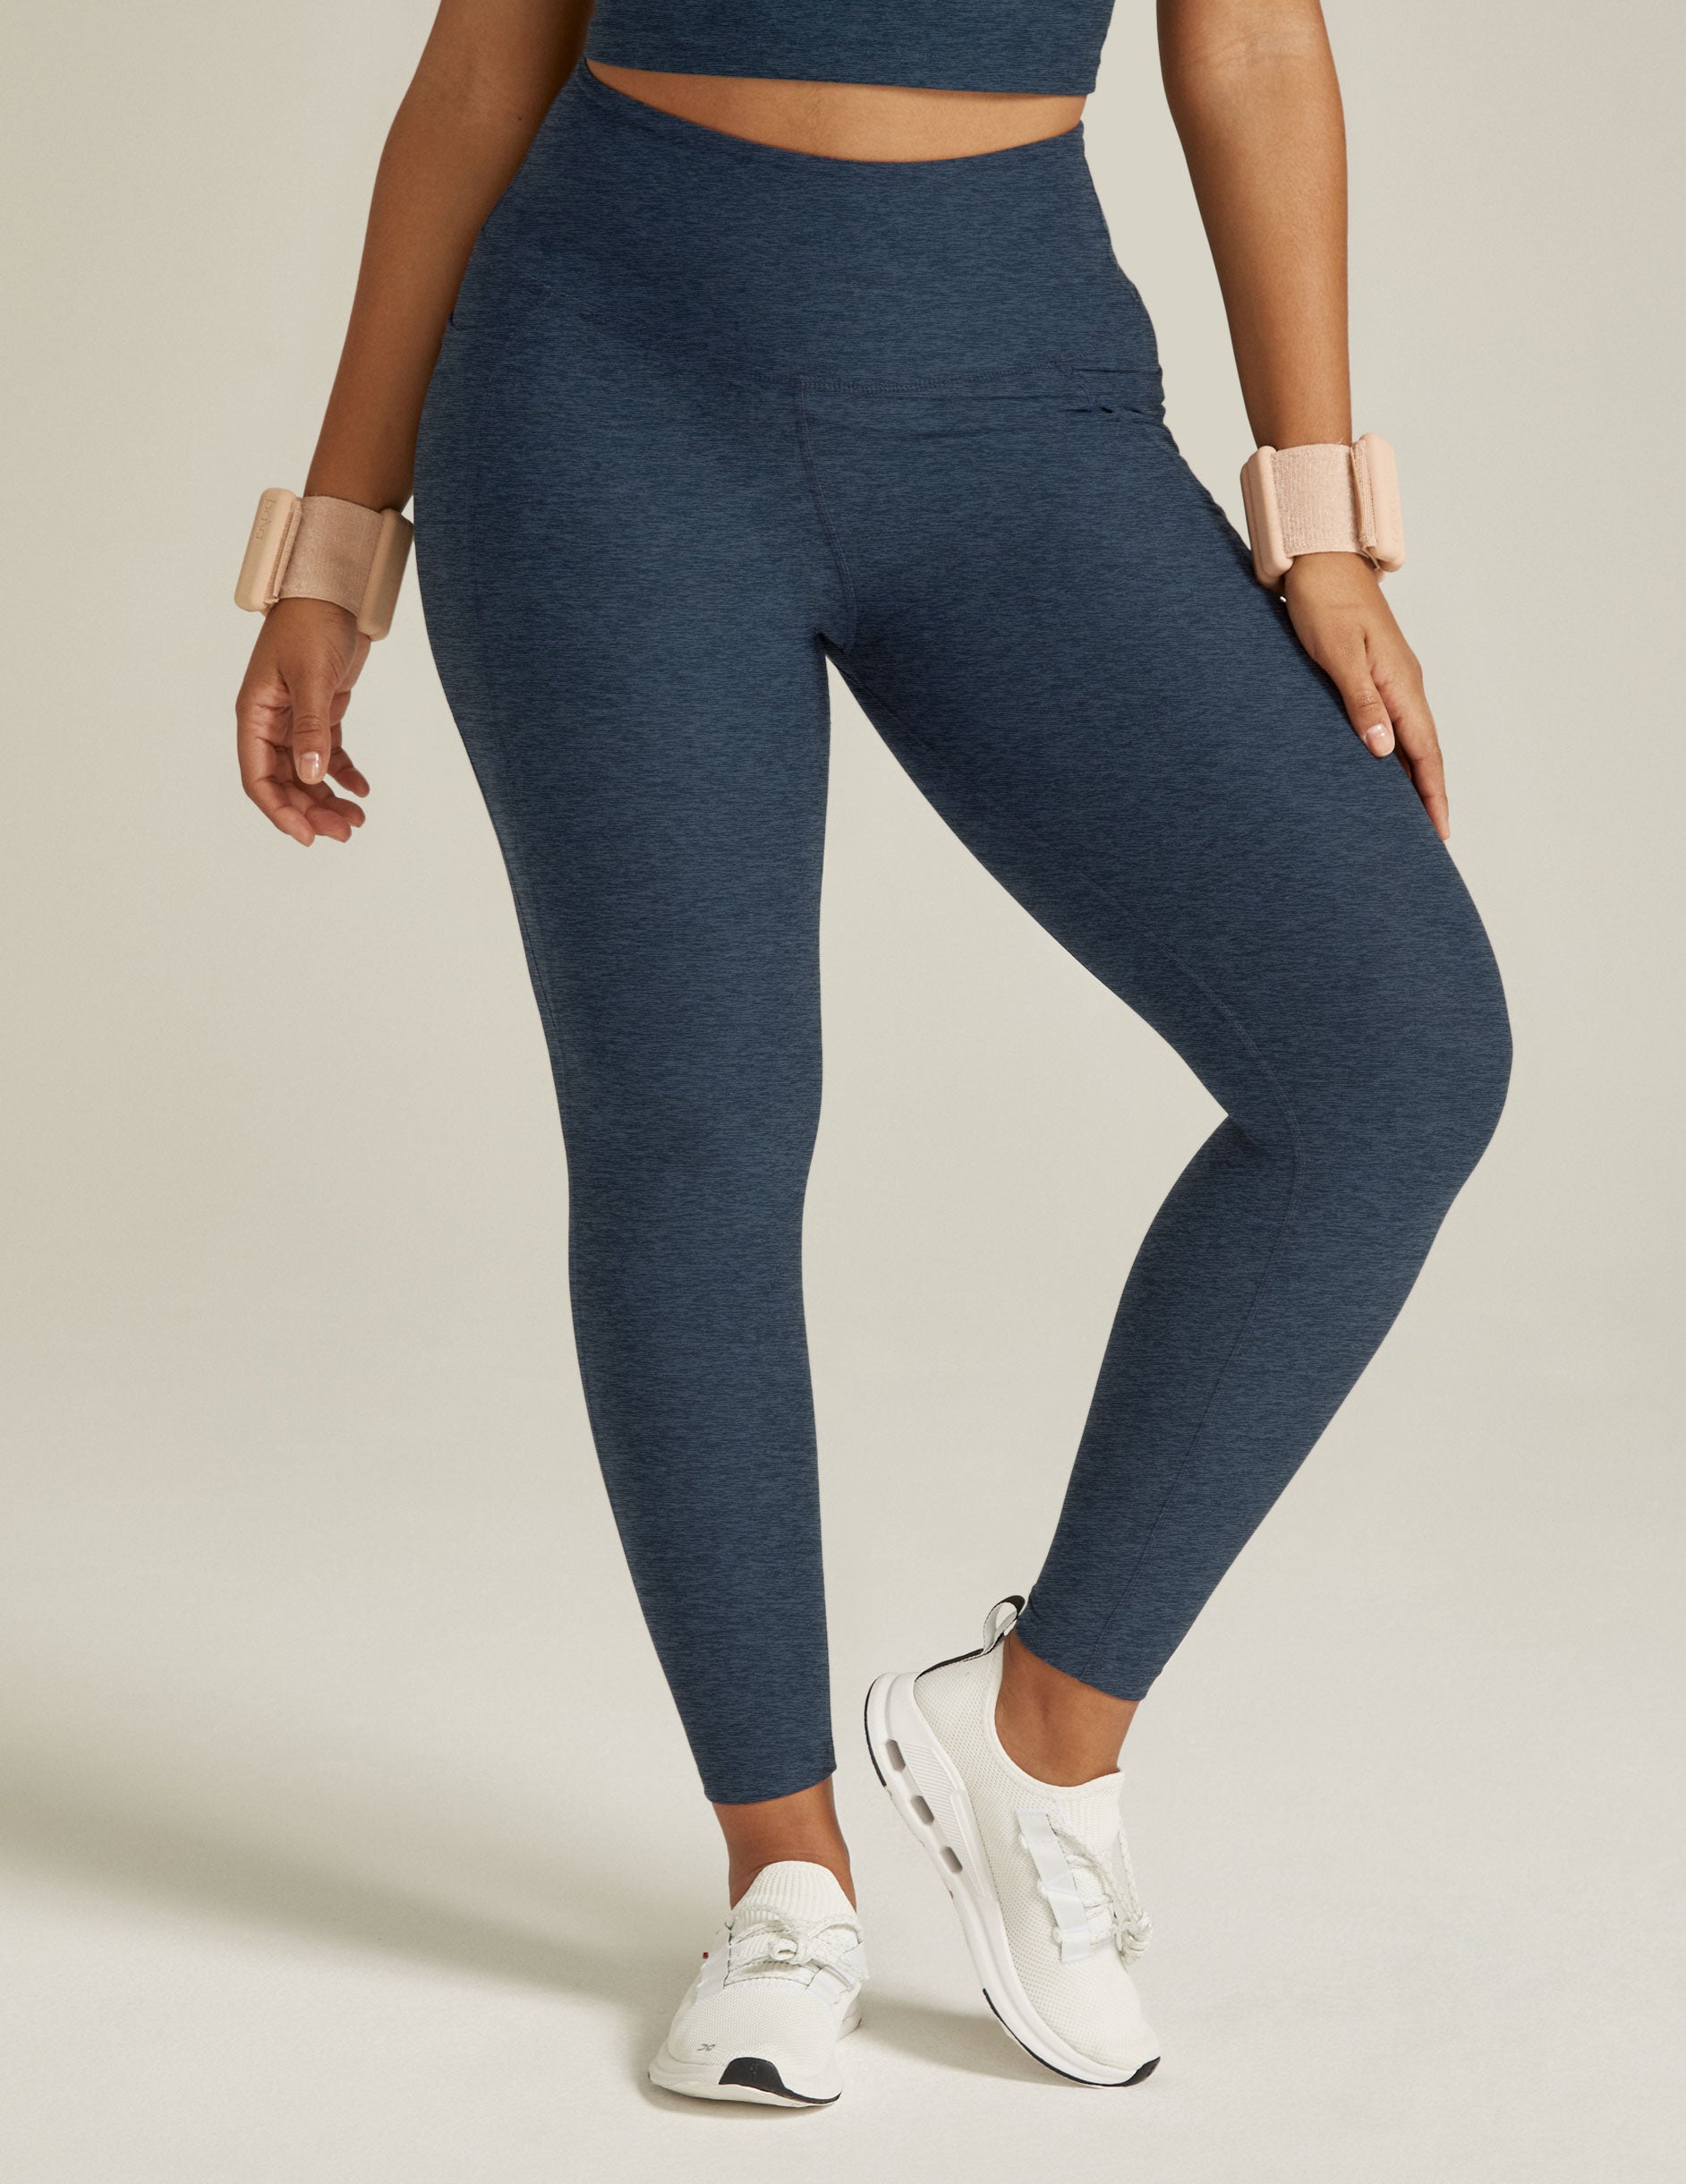 Navy Color Legging with High Waist